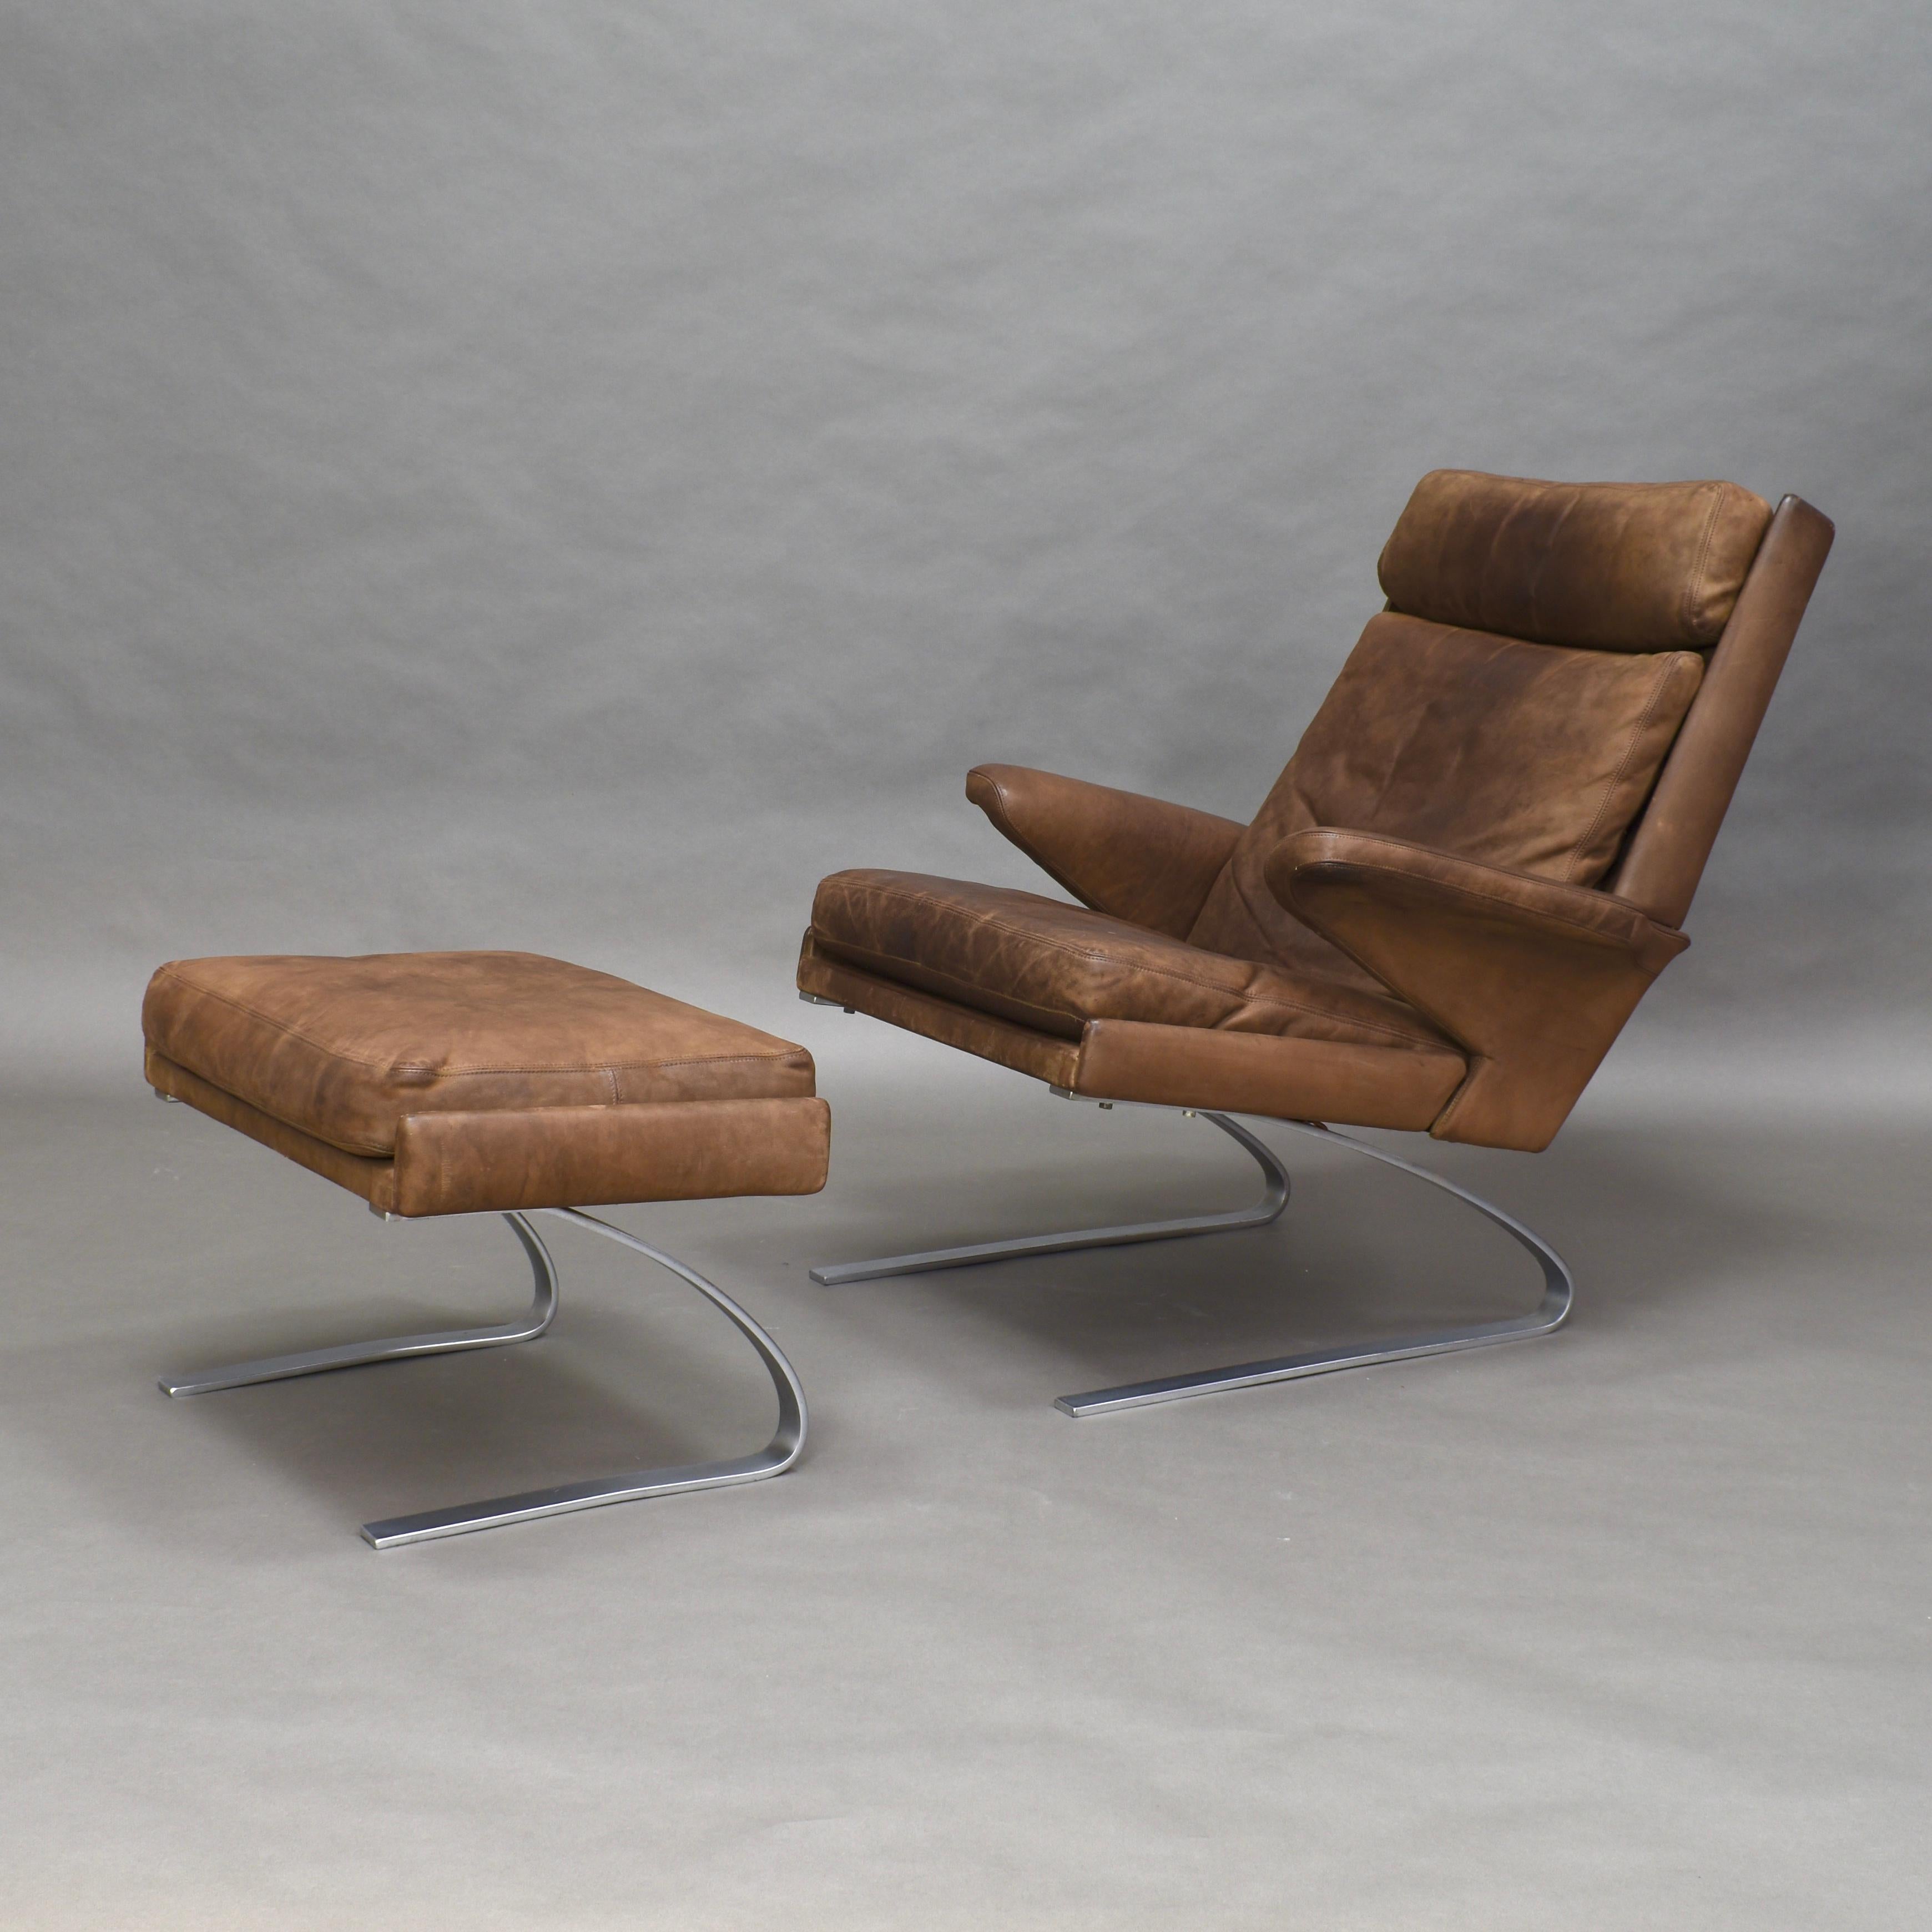 Rare full leather lounge chair and ottoman by Reinhold Adolf & Hans-Jürgen Schröpfer for COR – Germany, 1976, still in original condition.

The set still remains in original condition. The leather shows stains of use but the leather has been